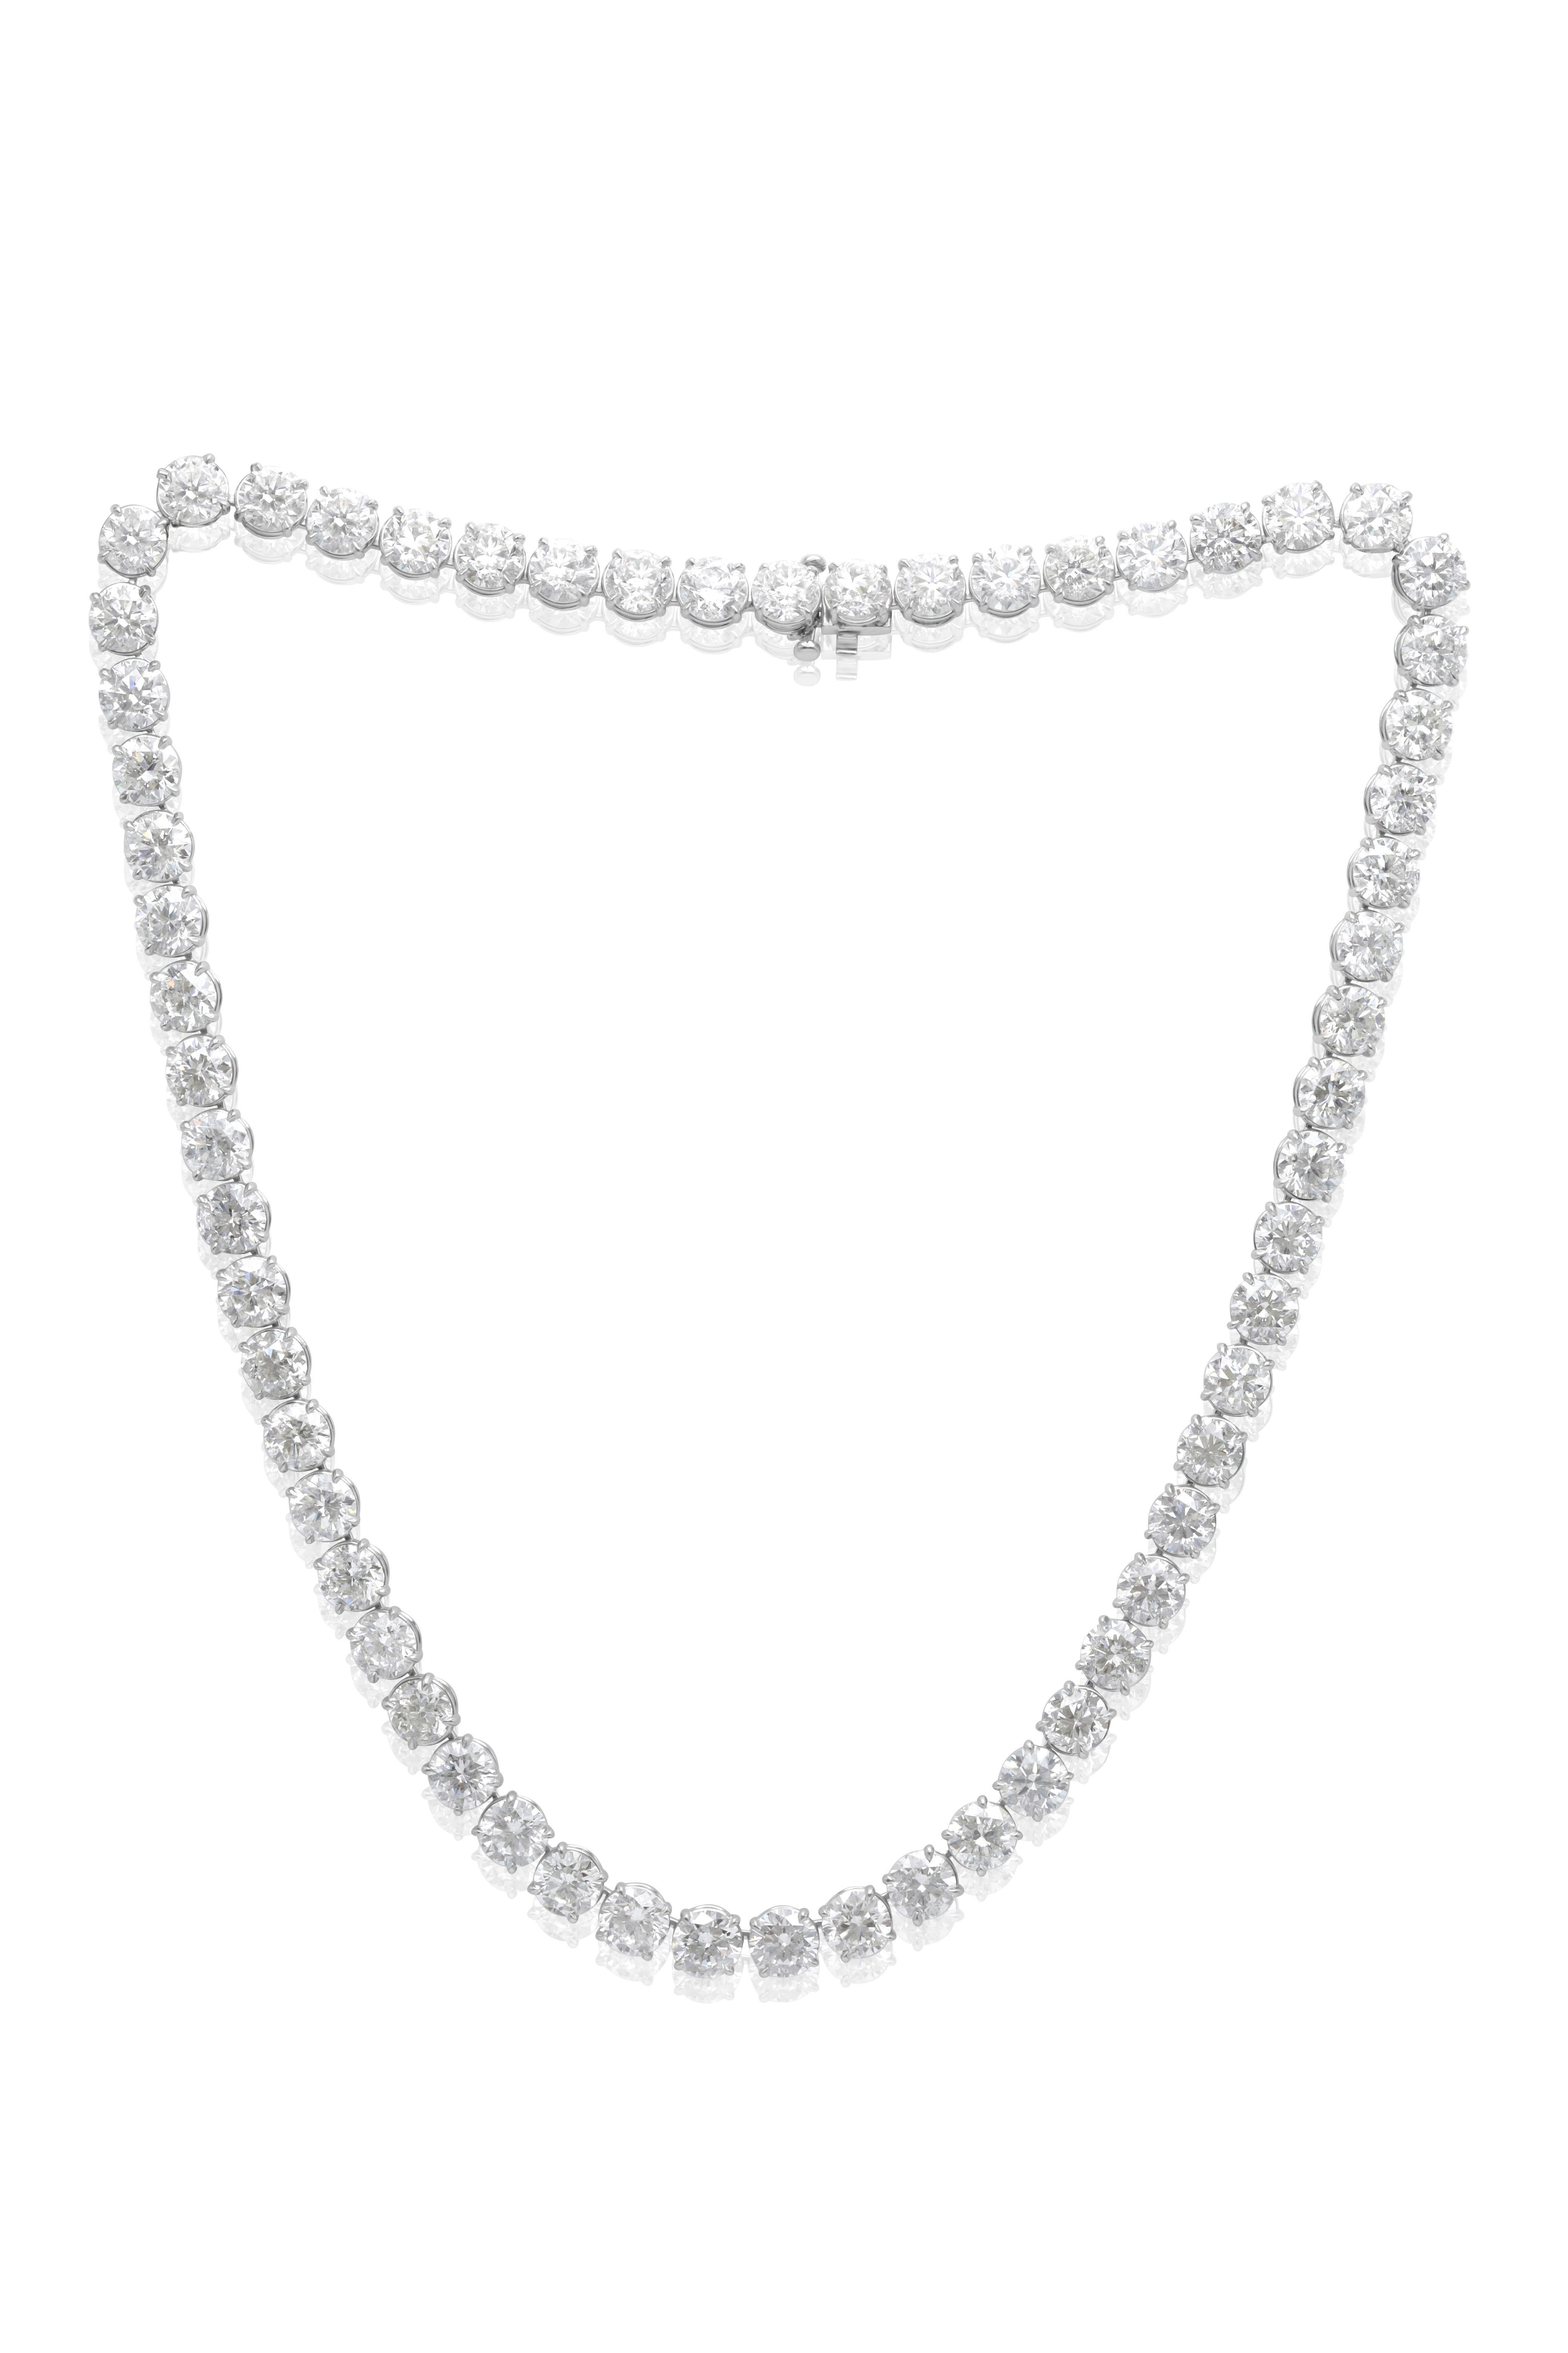 Round Cut Diana M. Custom 37.65 cts 4 Prong  Round Diamond 18k White Gold Tennis Necklace  For Sale